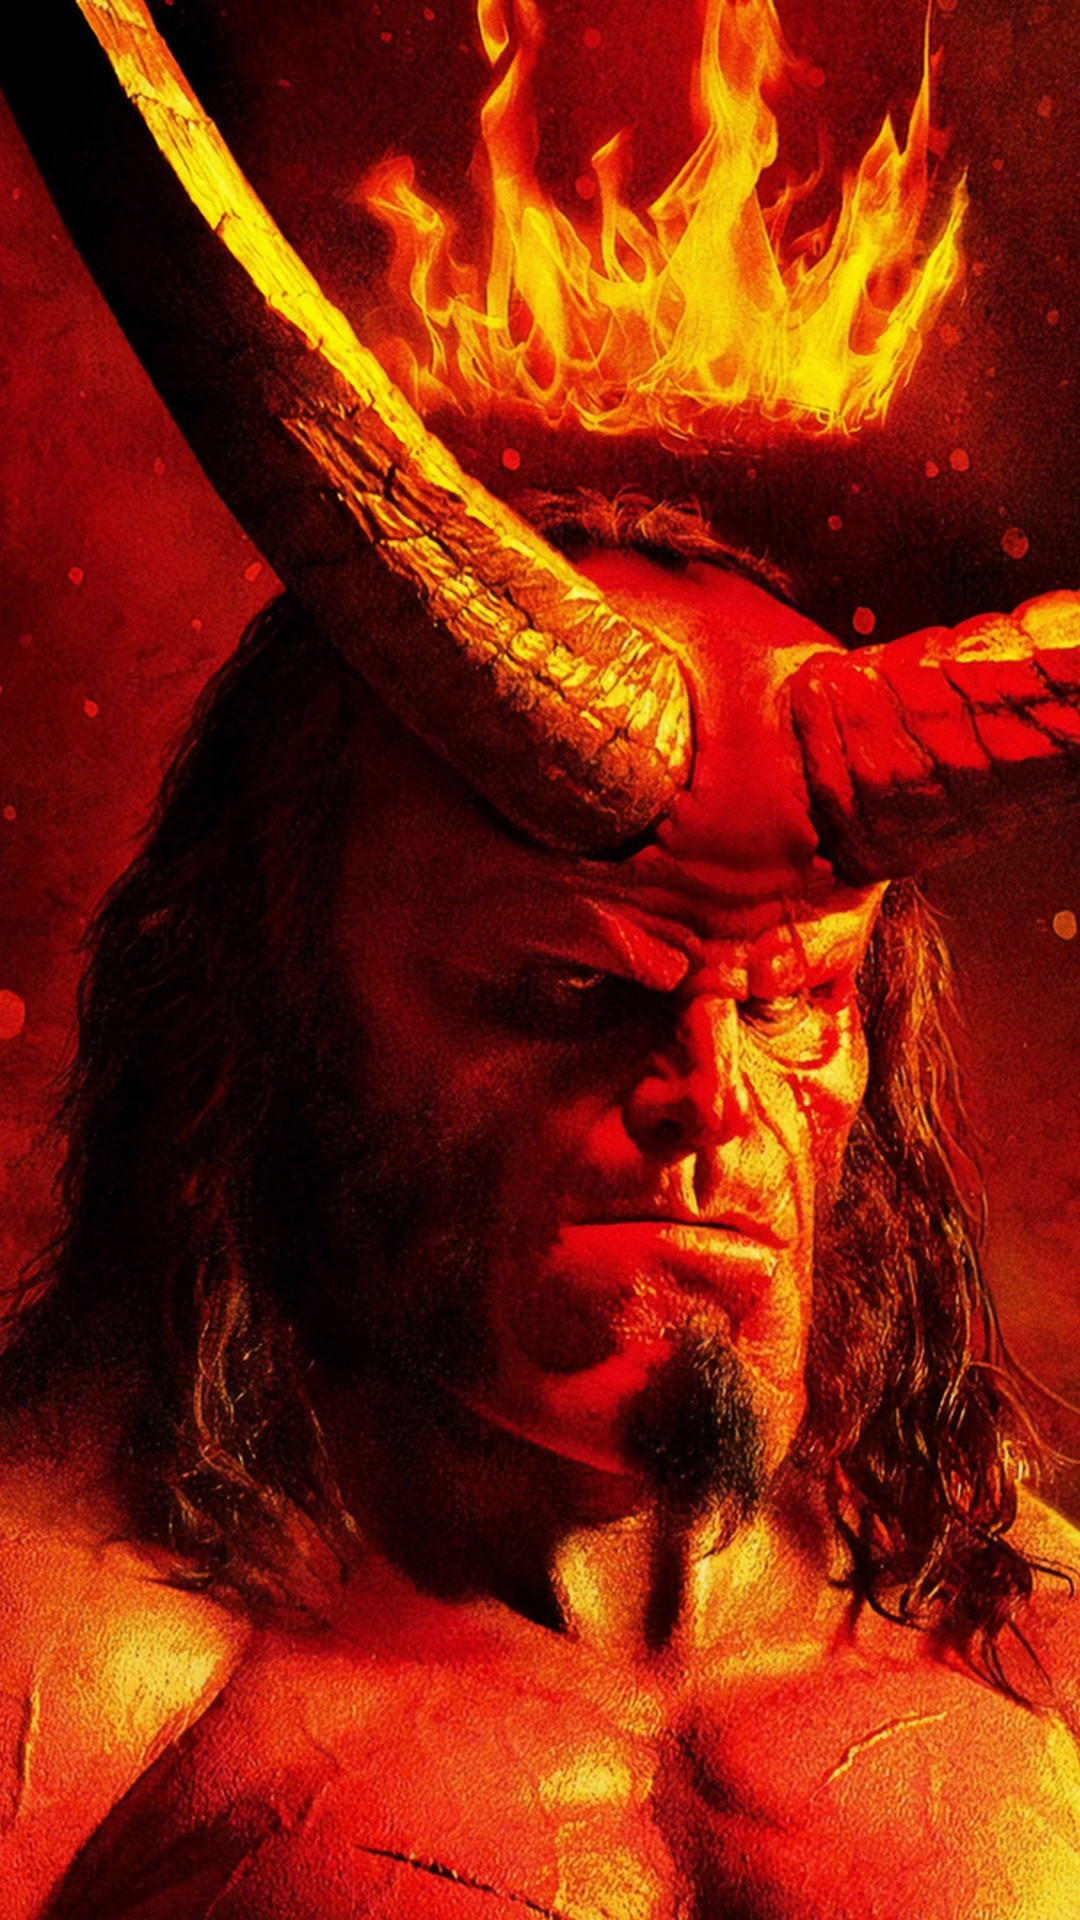 Hellboy 2019 Poster HD with high-resolution 1080x1920 pixel. You can use this poster wallpaper for your Desktop Computers, Mac Screensavers, Windows Backgrounds, iPhone Wallpapers, Tablet or Android Lock screen and another Mobile device